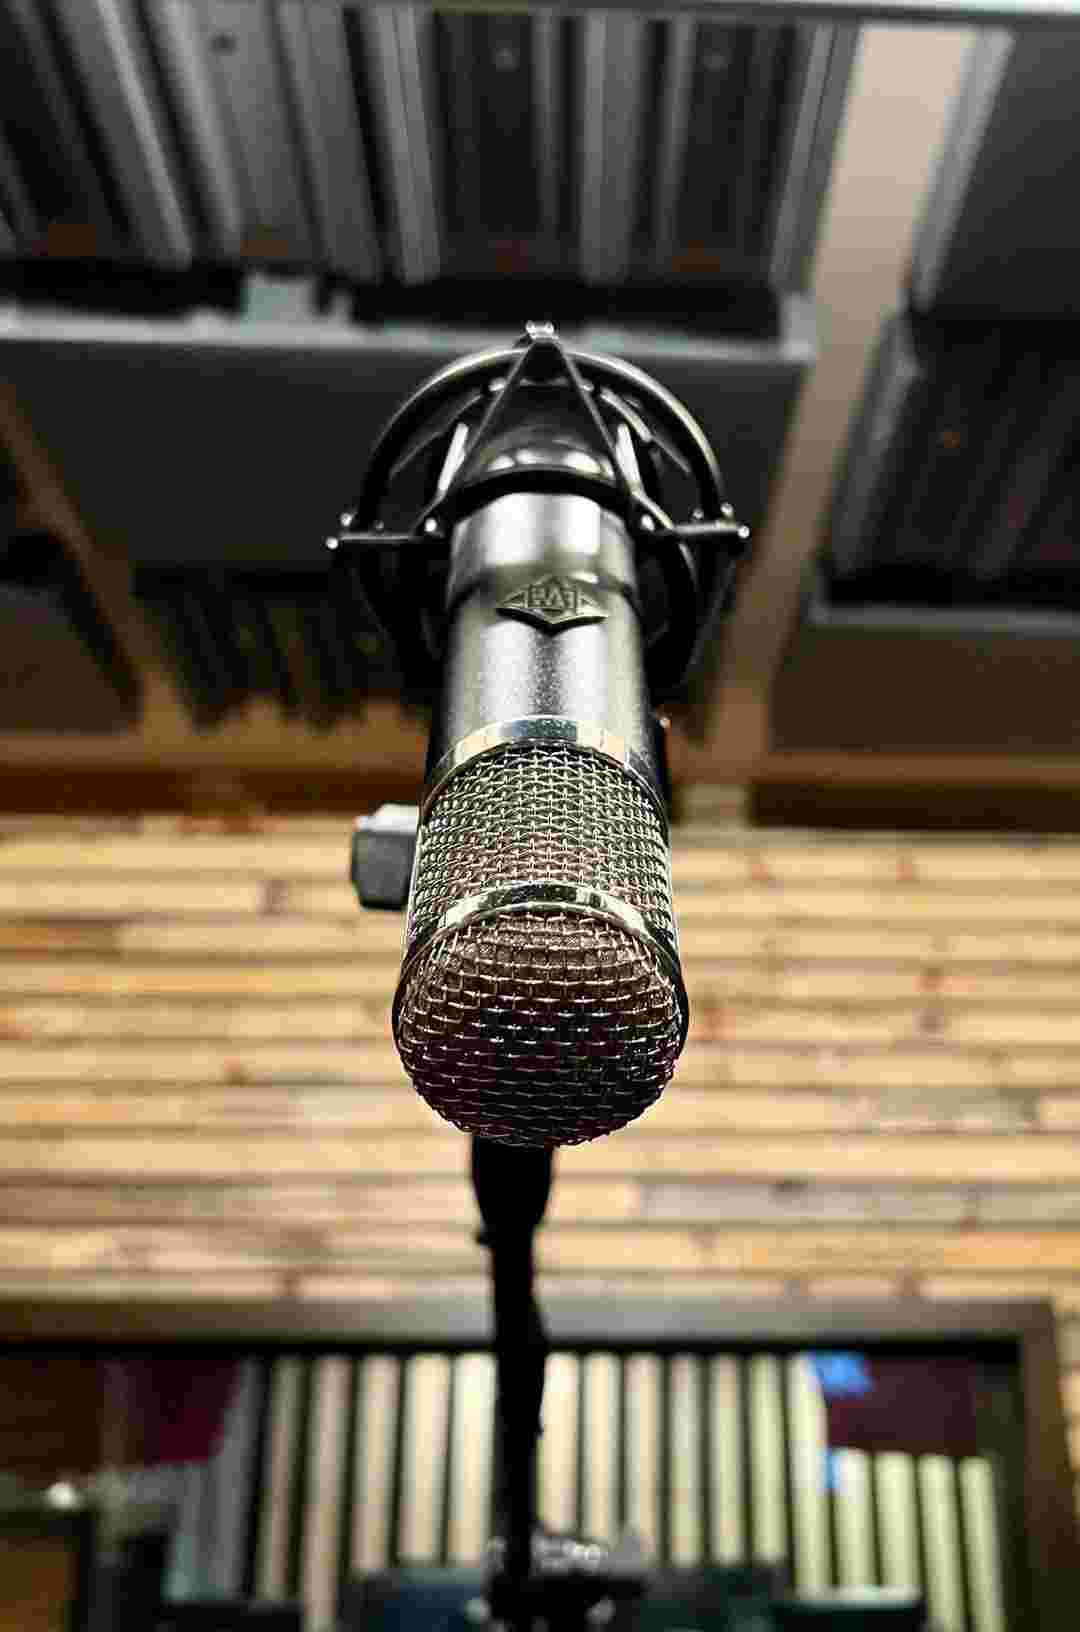 Close-up of a microphone in a recording studio with soundproofing panels visible in the background.